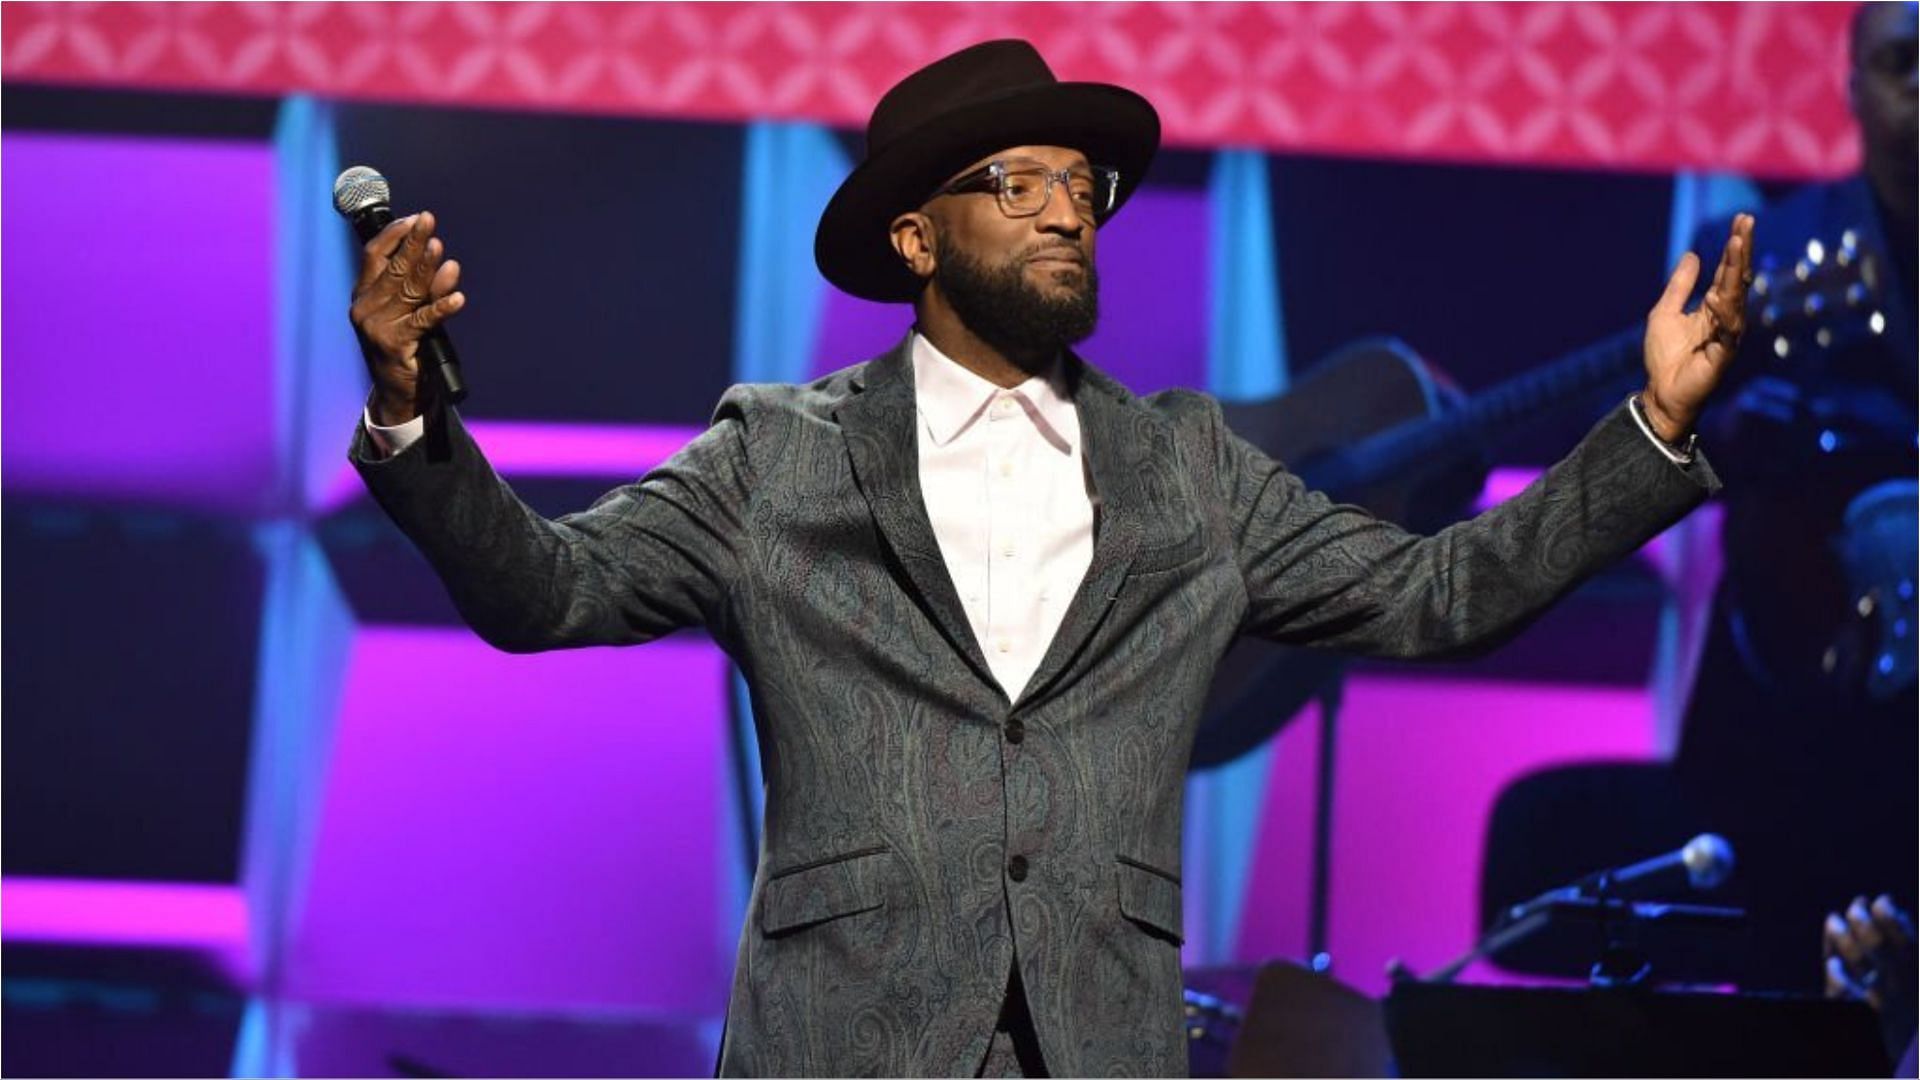 Rickey Smiley's son was discovered by his girlfriend in an unresponsive state (Image via Aaron J. Thornton/Getty Images)